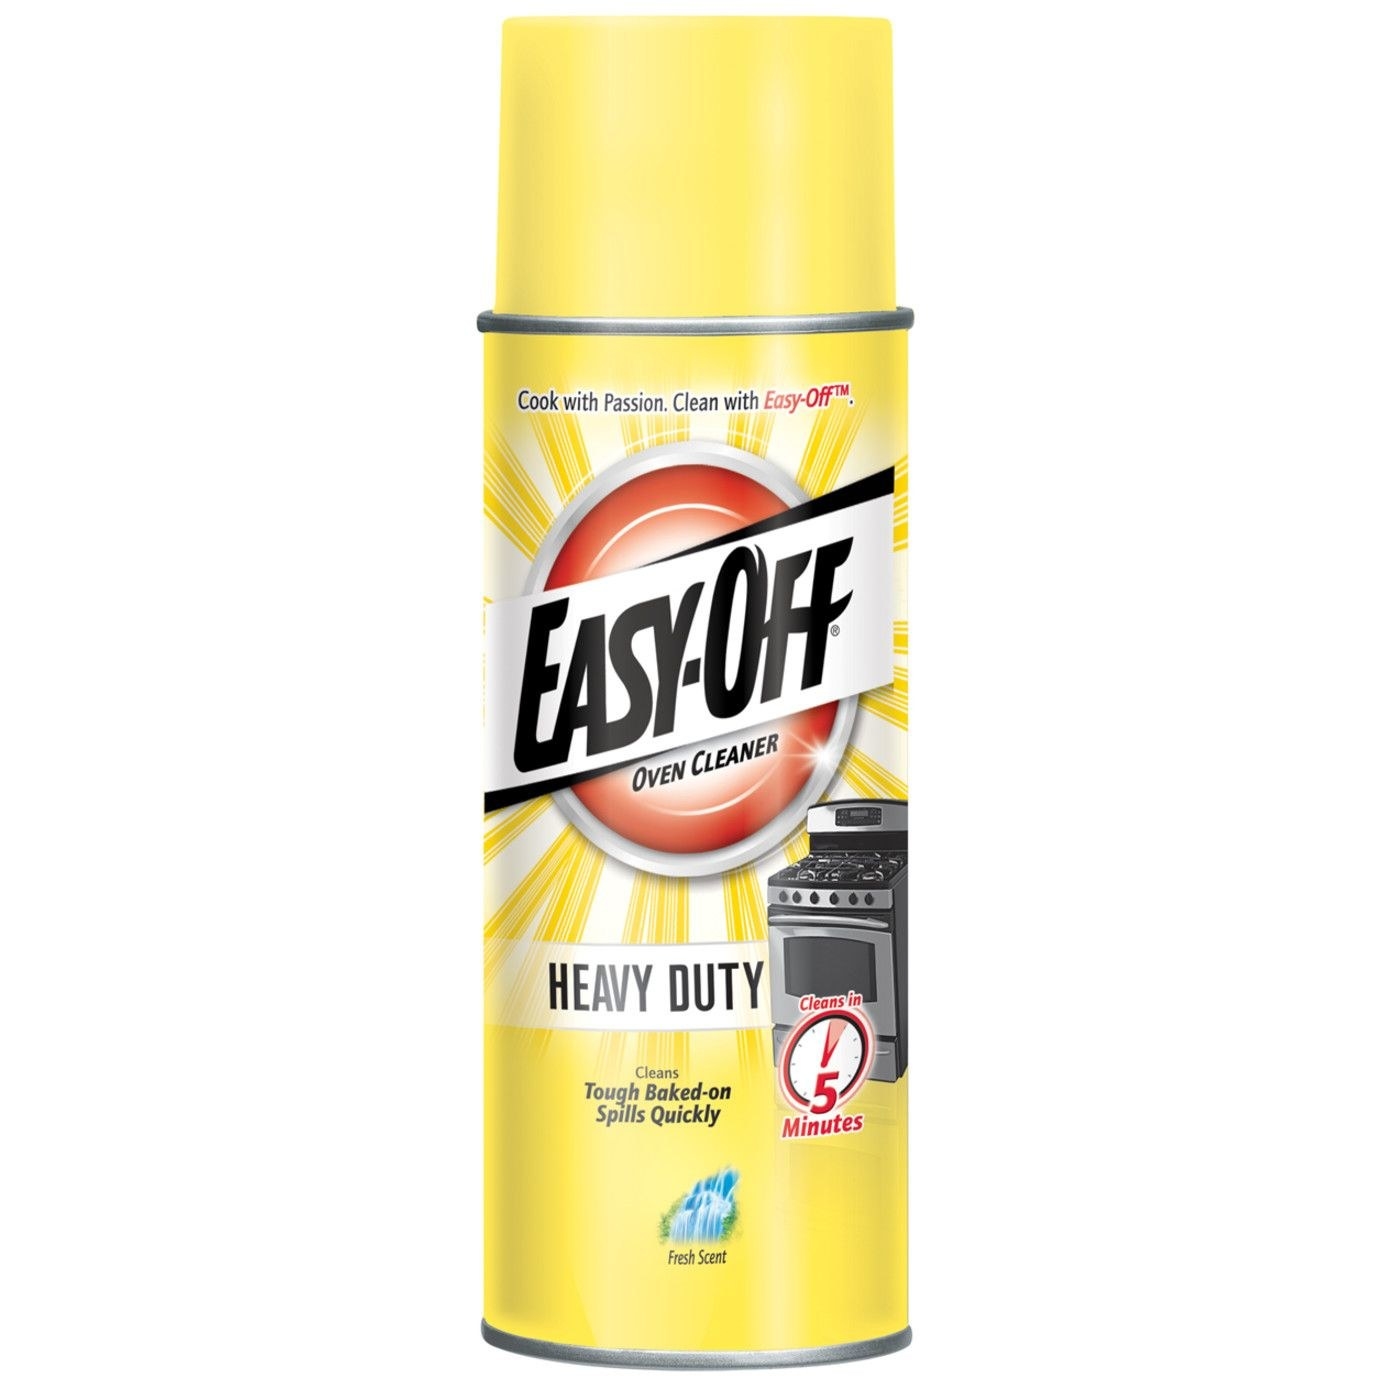 a can of easy-off fresh scent heavy duty oven cleaner